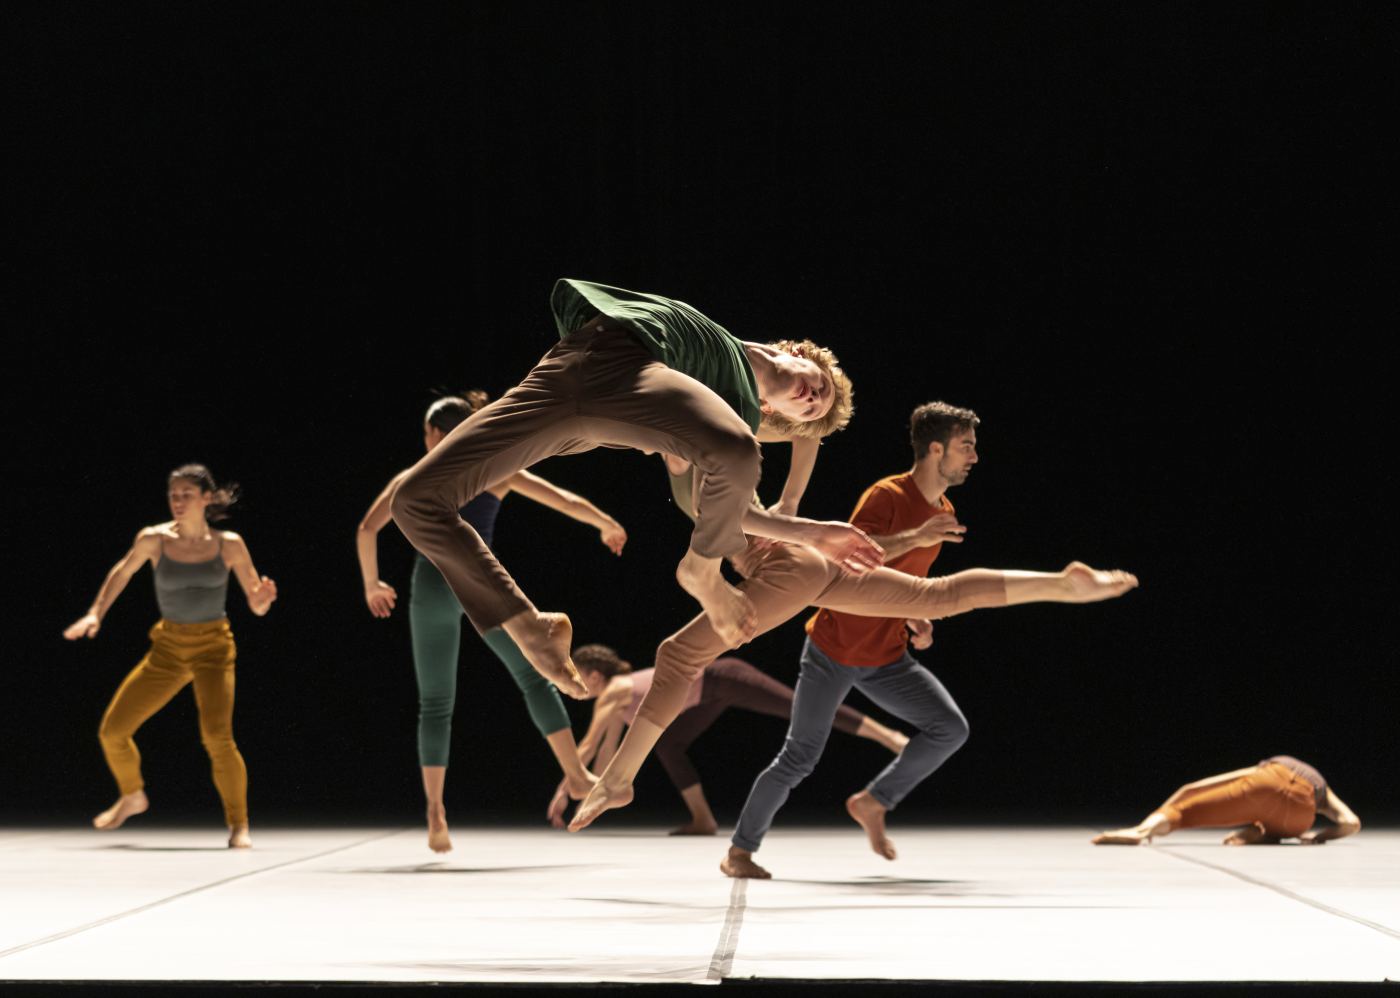 12. V.Ketelslegers and ensemble, “Secus” by O.Naharin, Ballet of the State Theater Nuremberg 2022 © J.Vallinas